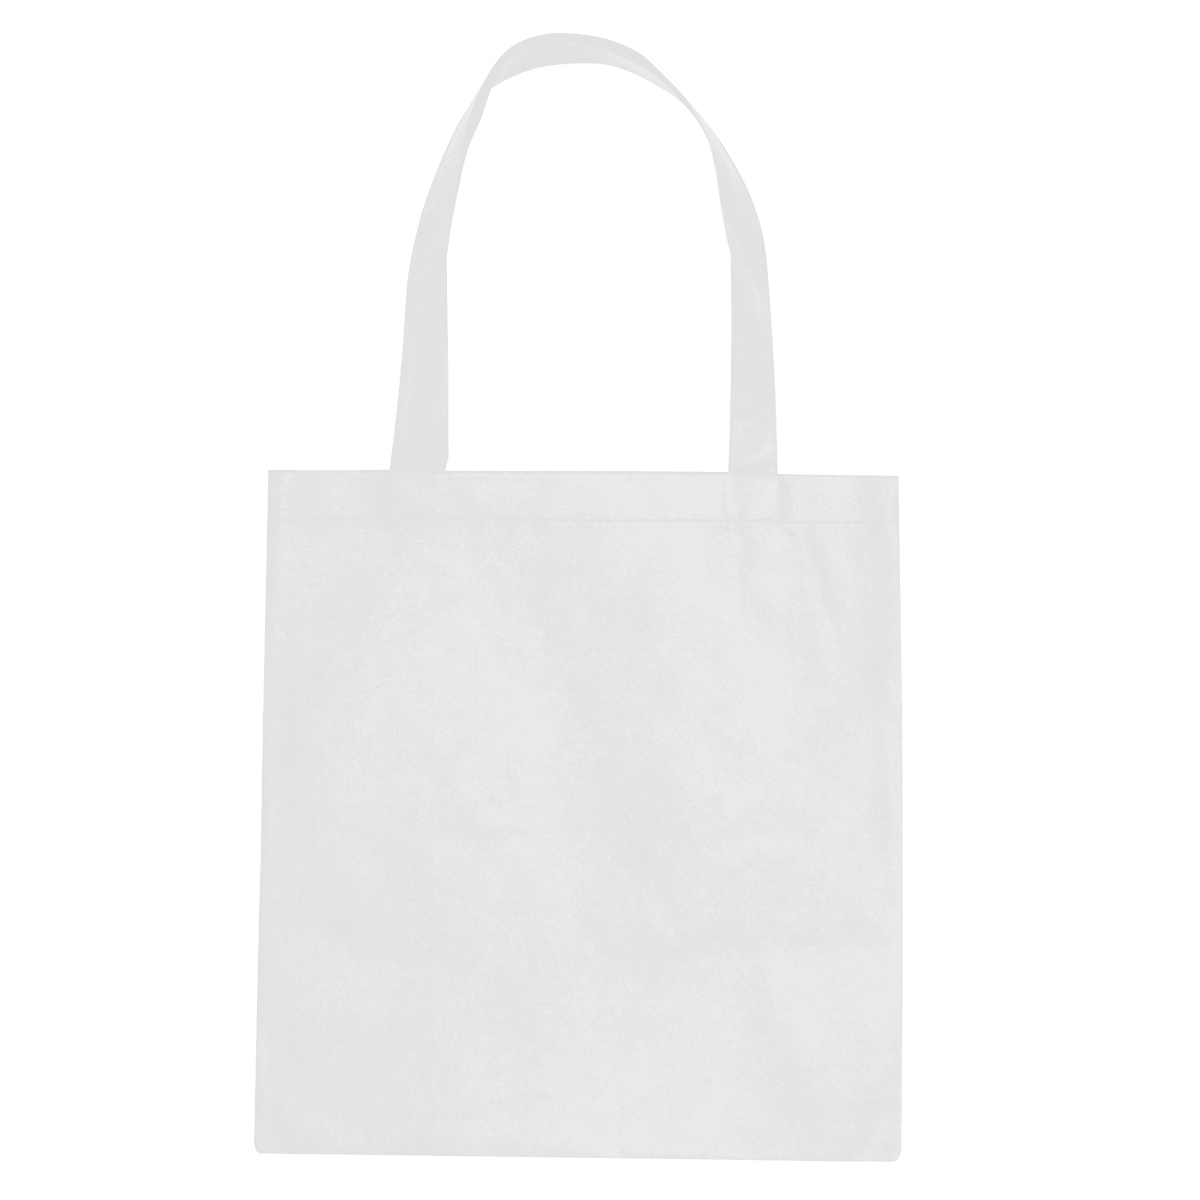 #3030 Non-Woven Promotional Tote Bag - Hit Promotional Products